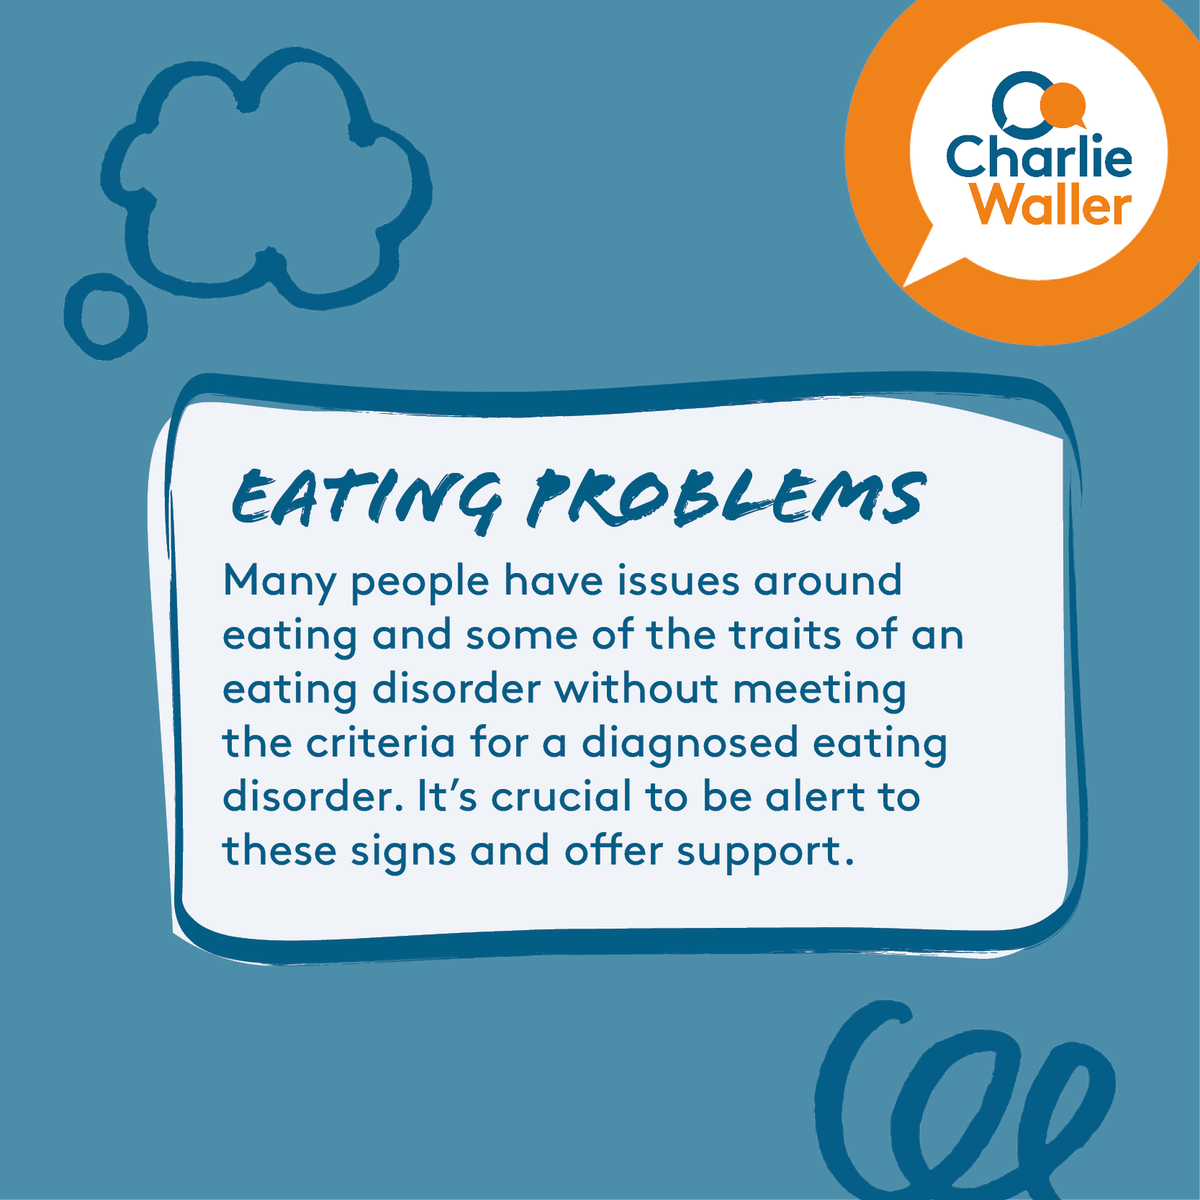 Diagnosed or not, young people with eating problems of any nature or severity are deserving of support. If you’re a parent and worried about your child's eating, join our free online workshops to learn how to support them. charliewaller.org/what-we-offer/… #EatingDisorderAwarenessWeek